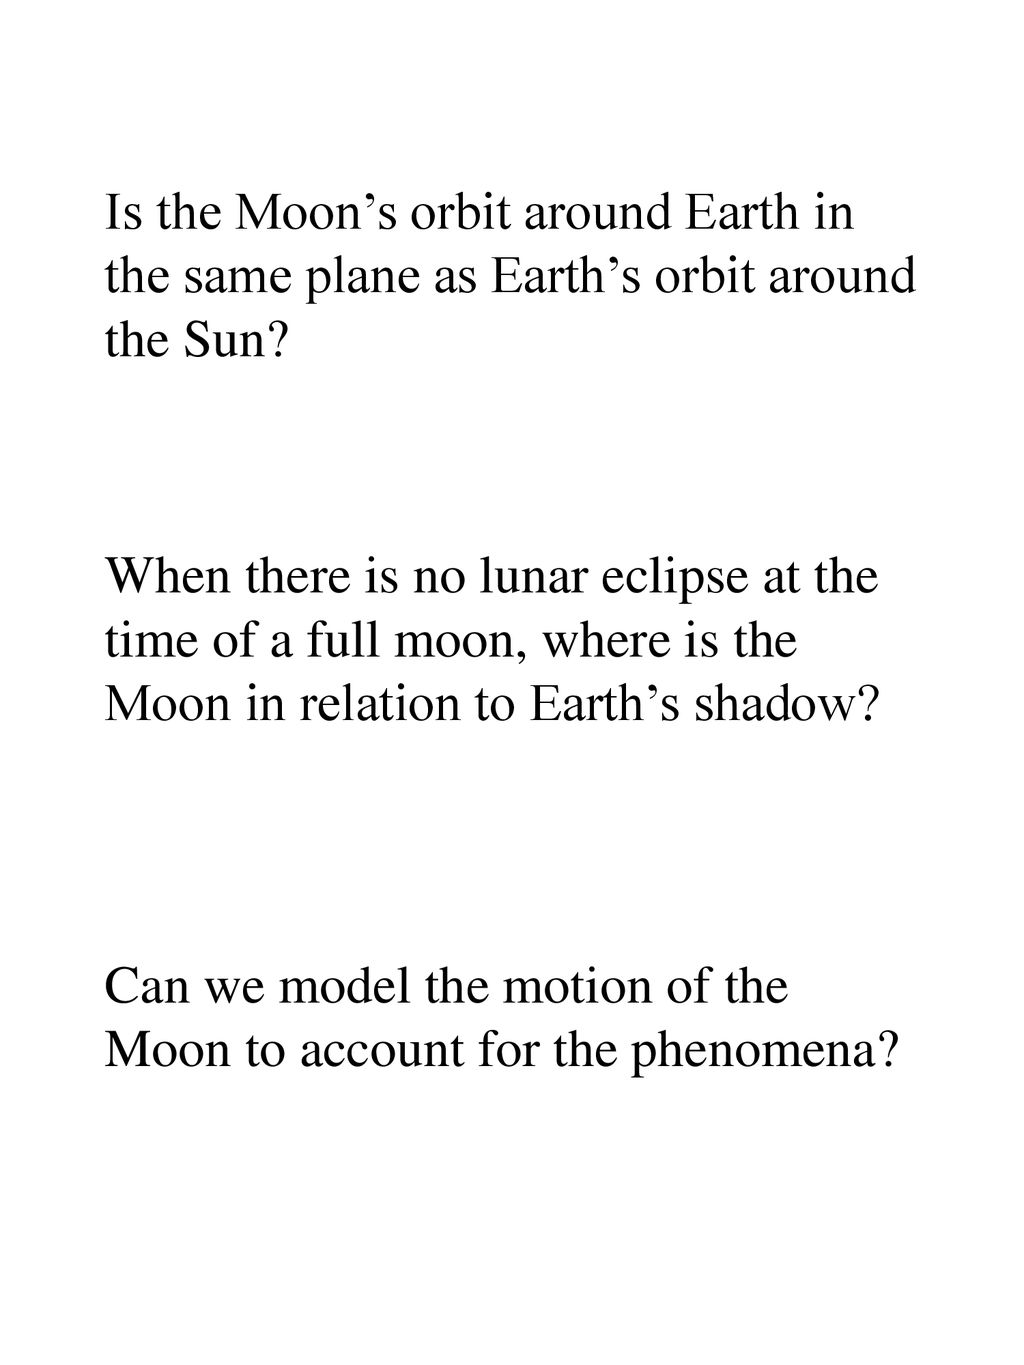 Is the Moon’s orbit around Earth in the same plane as Earth’s orbit around the Sun